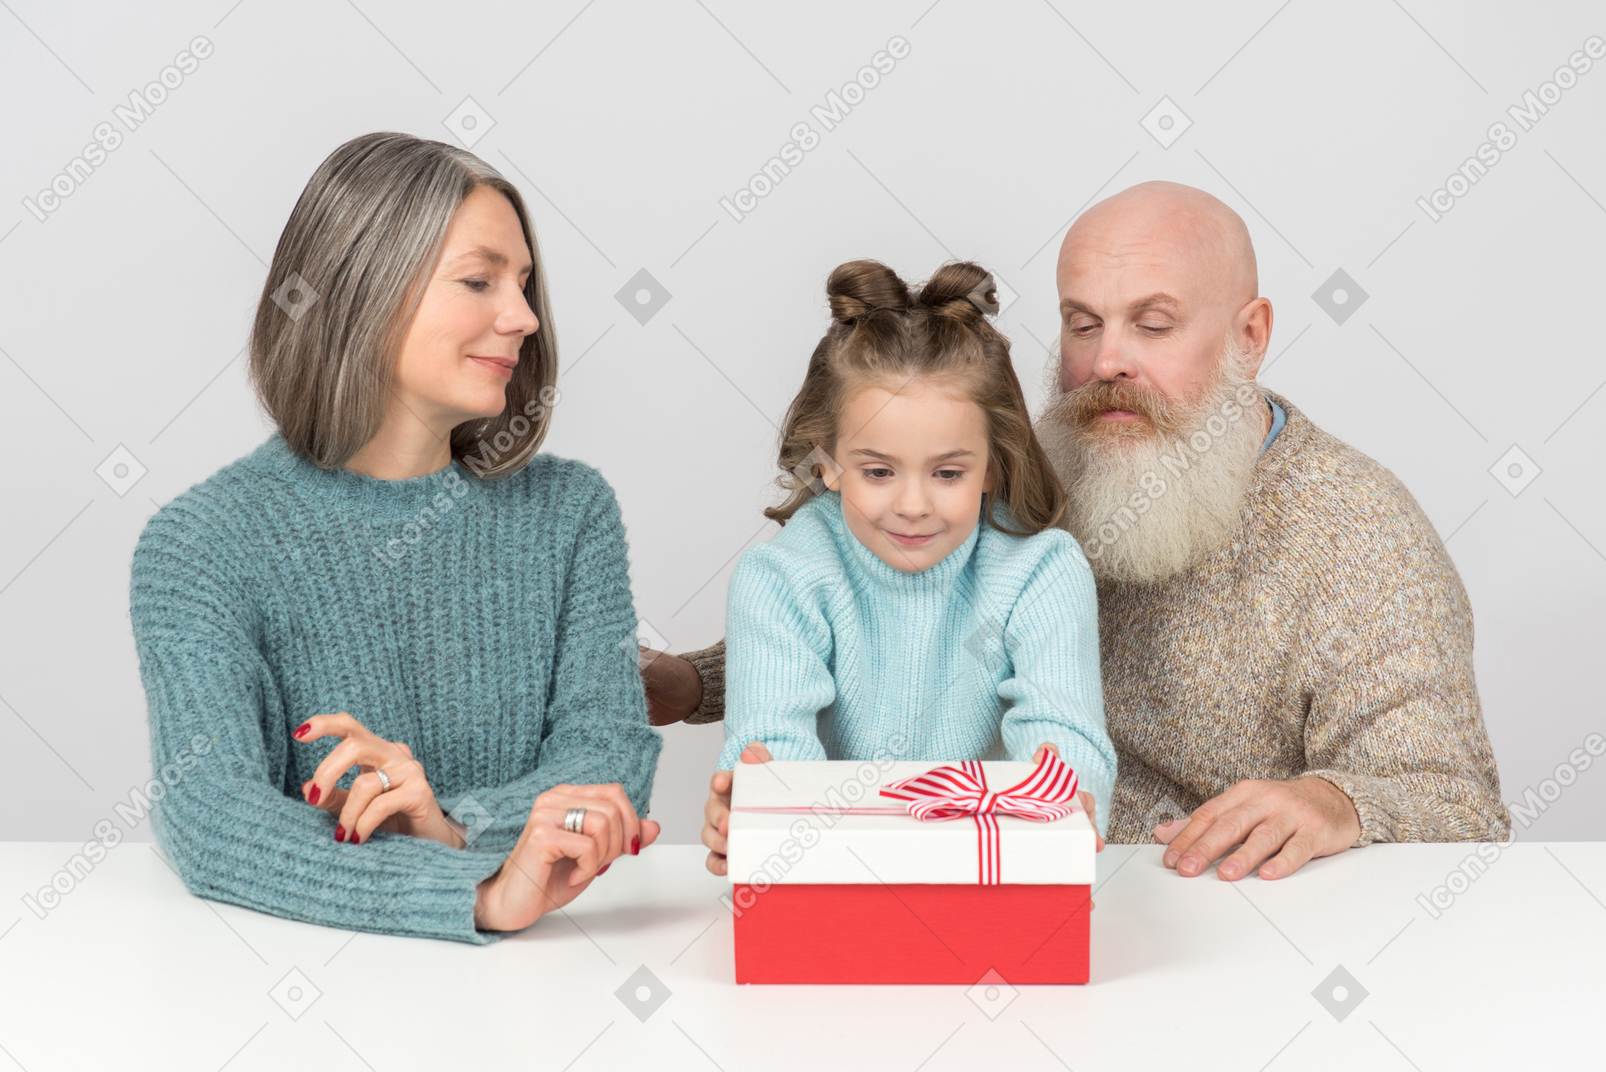 Kid girl sitting next to her grandparents and holding gift box